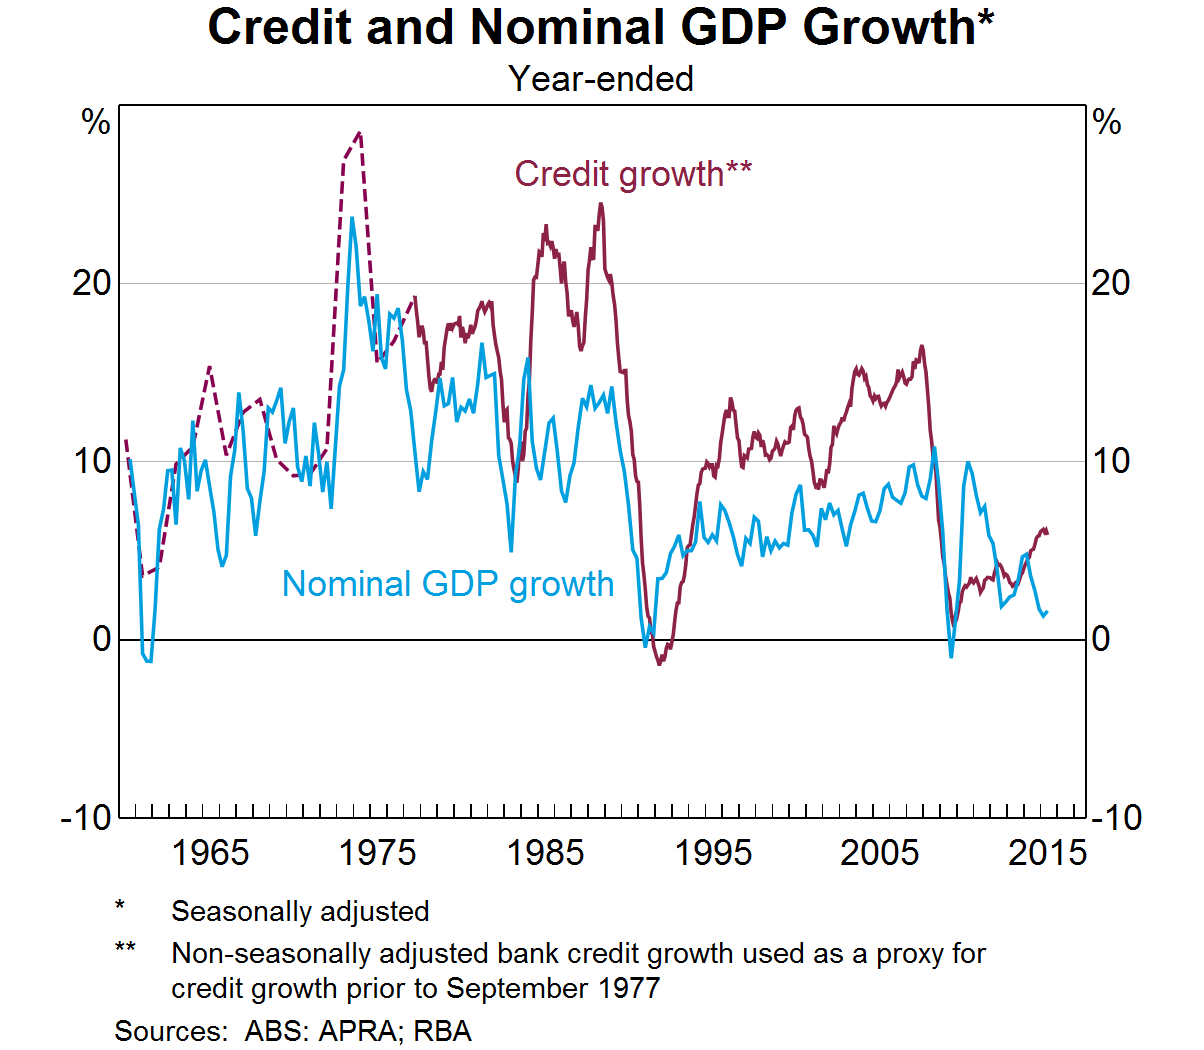 Graph 4: Credit and Nominal GDP Growth